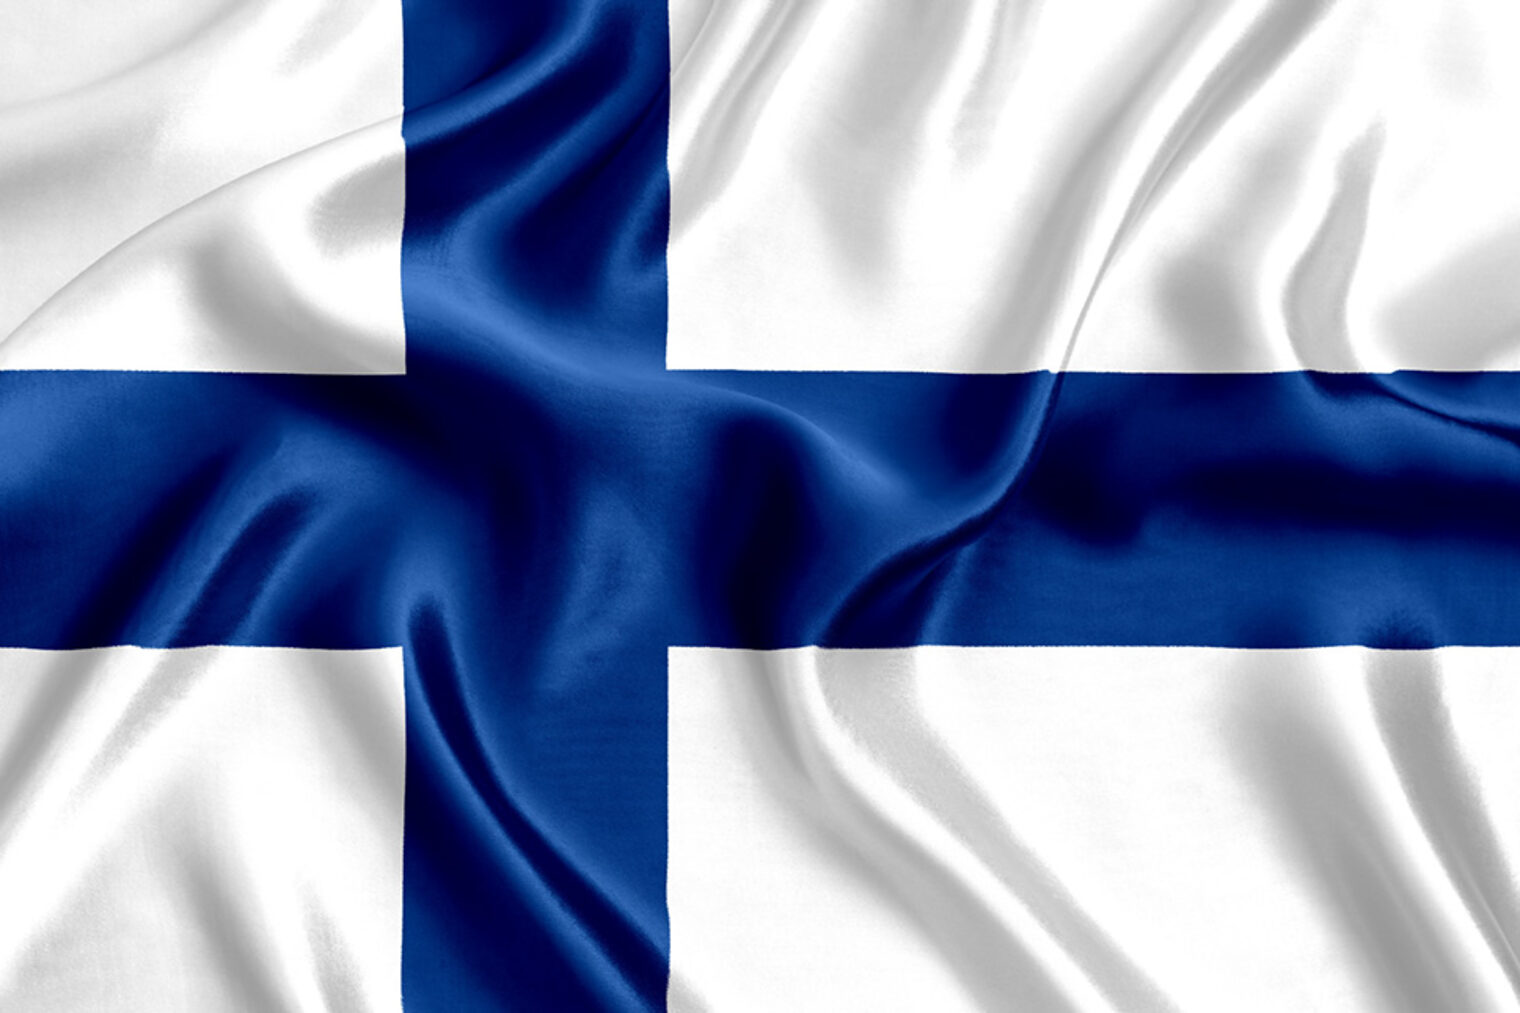 Flag of Finland silk Schlagwort(e): flag, finland, blue, background, national, silk, symbol, country, finnish, 3d, white, design, nation, sign, illustration, banner, waving, texture, freedom, patriotic, patriotism, color, concept, history, textile, wallpaper, fabric, celebration, europe, state, patriot, wave, european, emblem, cross, closeup, icon, identity, sovereign, wind, abstract, holiday, colorful, traditional, world, symbolic, satin, government, isolated, travel